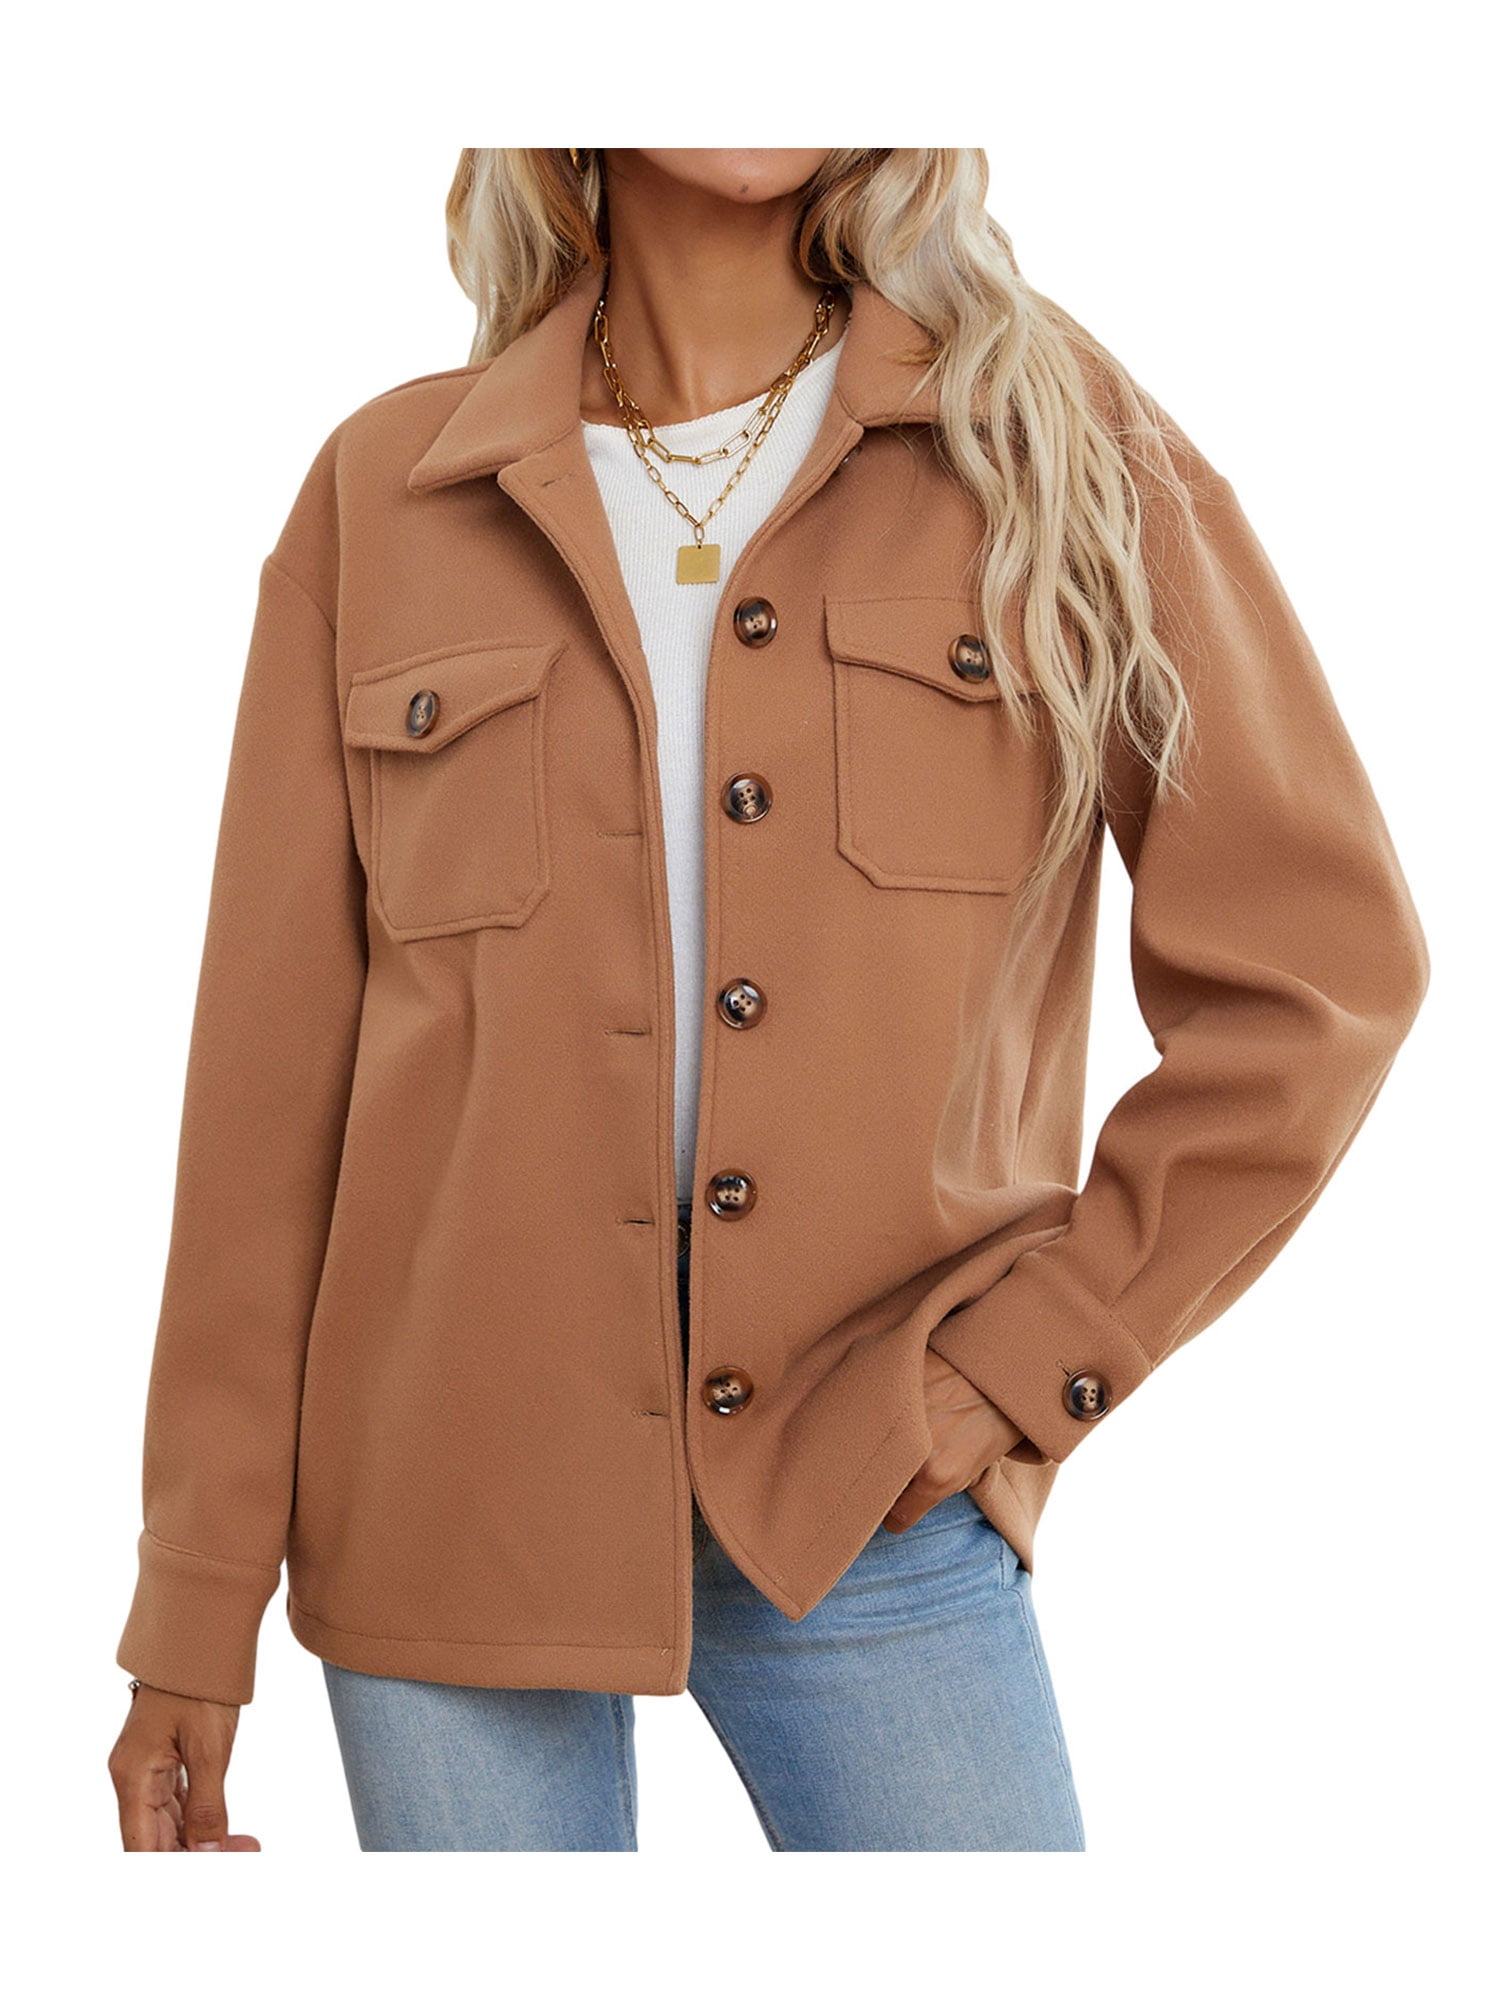 CHUOAND Women's Solid Color Jacket,my account with prime,1 dollar items  only,bulk t-shirts wholesale for printing,womens clothes clearance,sale